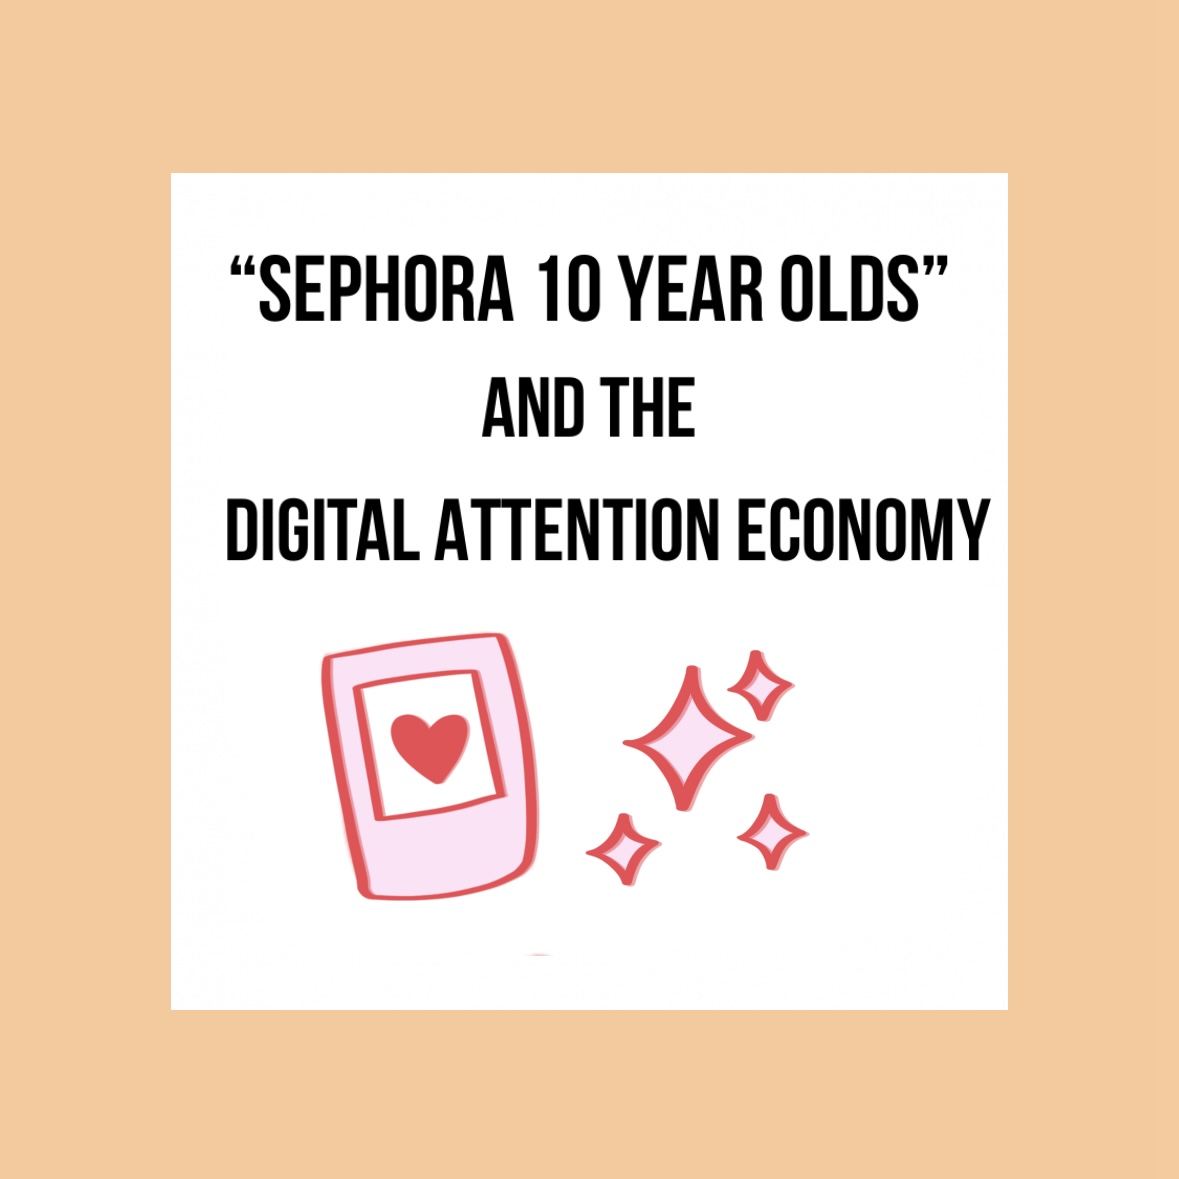 “Sephora 10 Year Olds” and the Digital Attention Economy